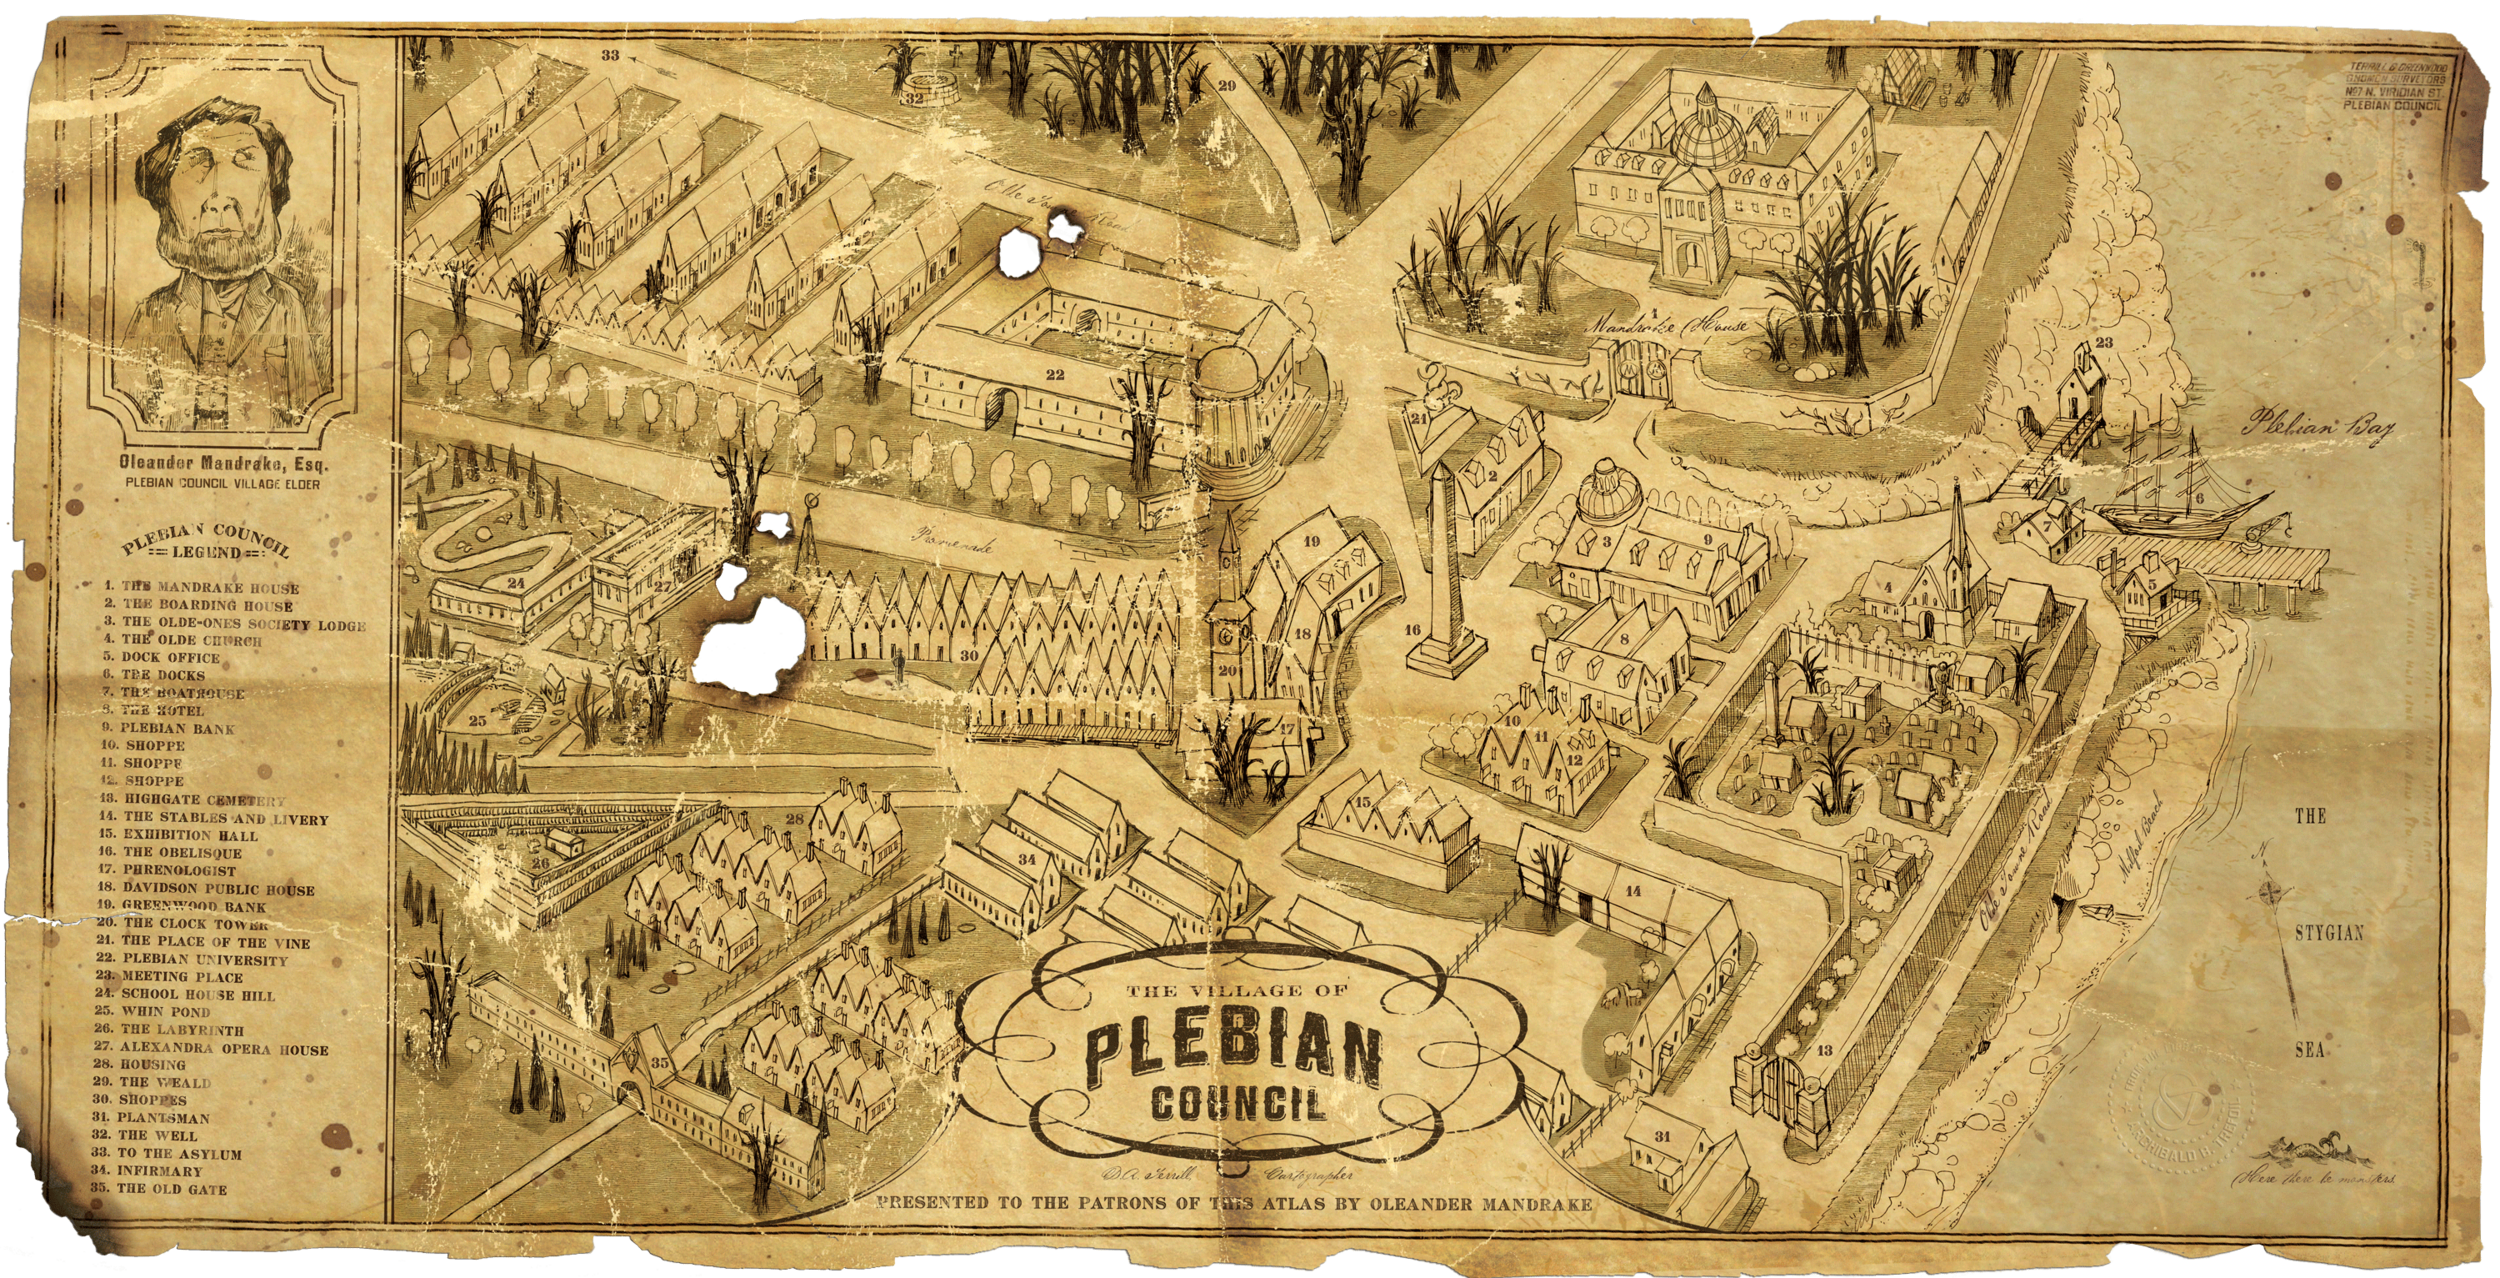 Welcome to Plebian Council